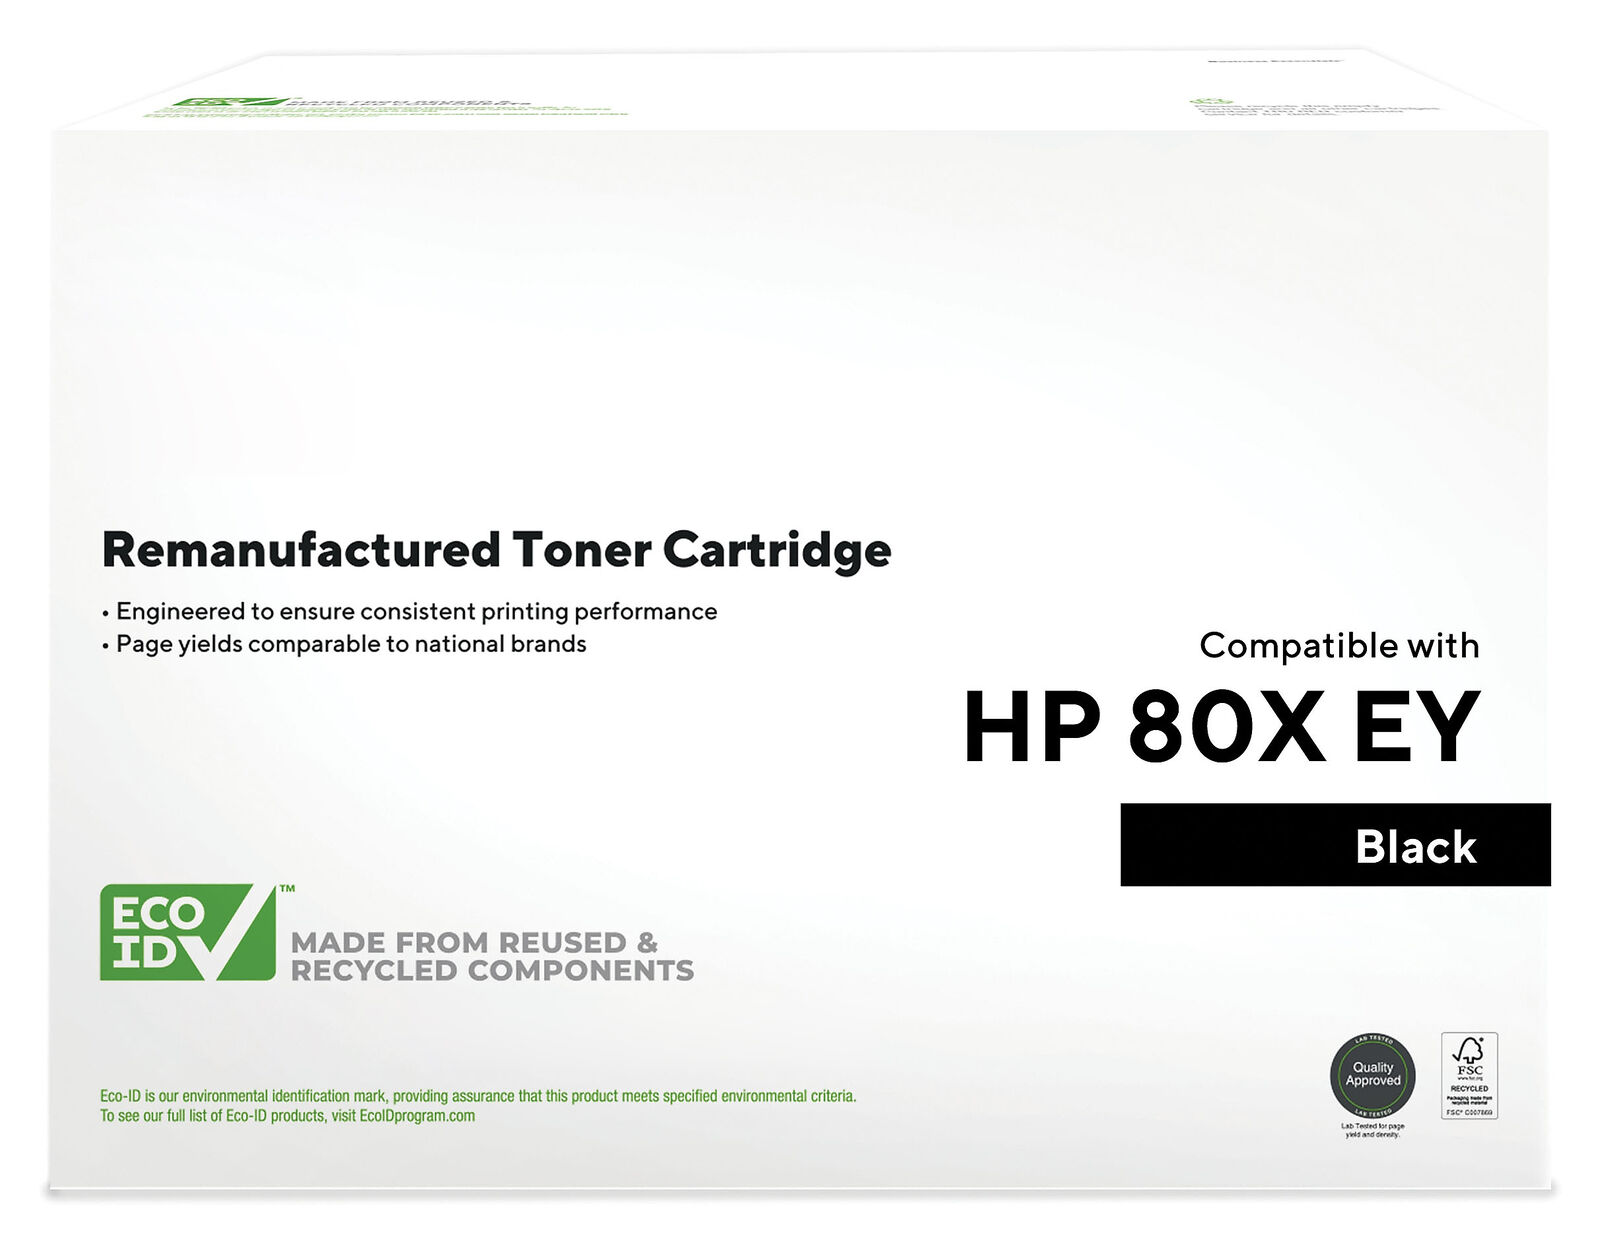 HITOUCH BUSINESS SERVICES Reman Black Extra High Yield Toner Cartridge